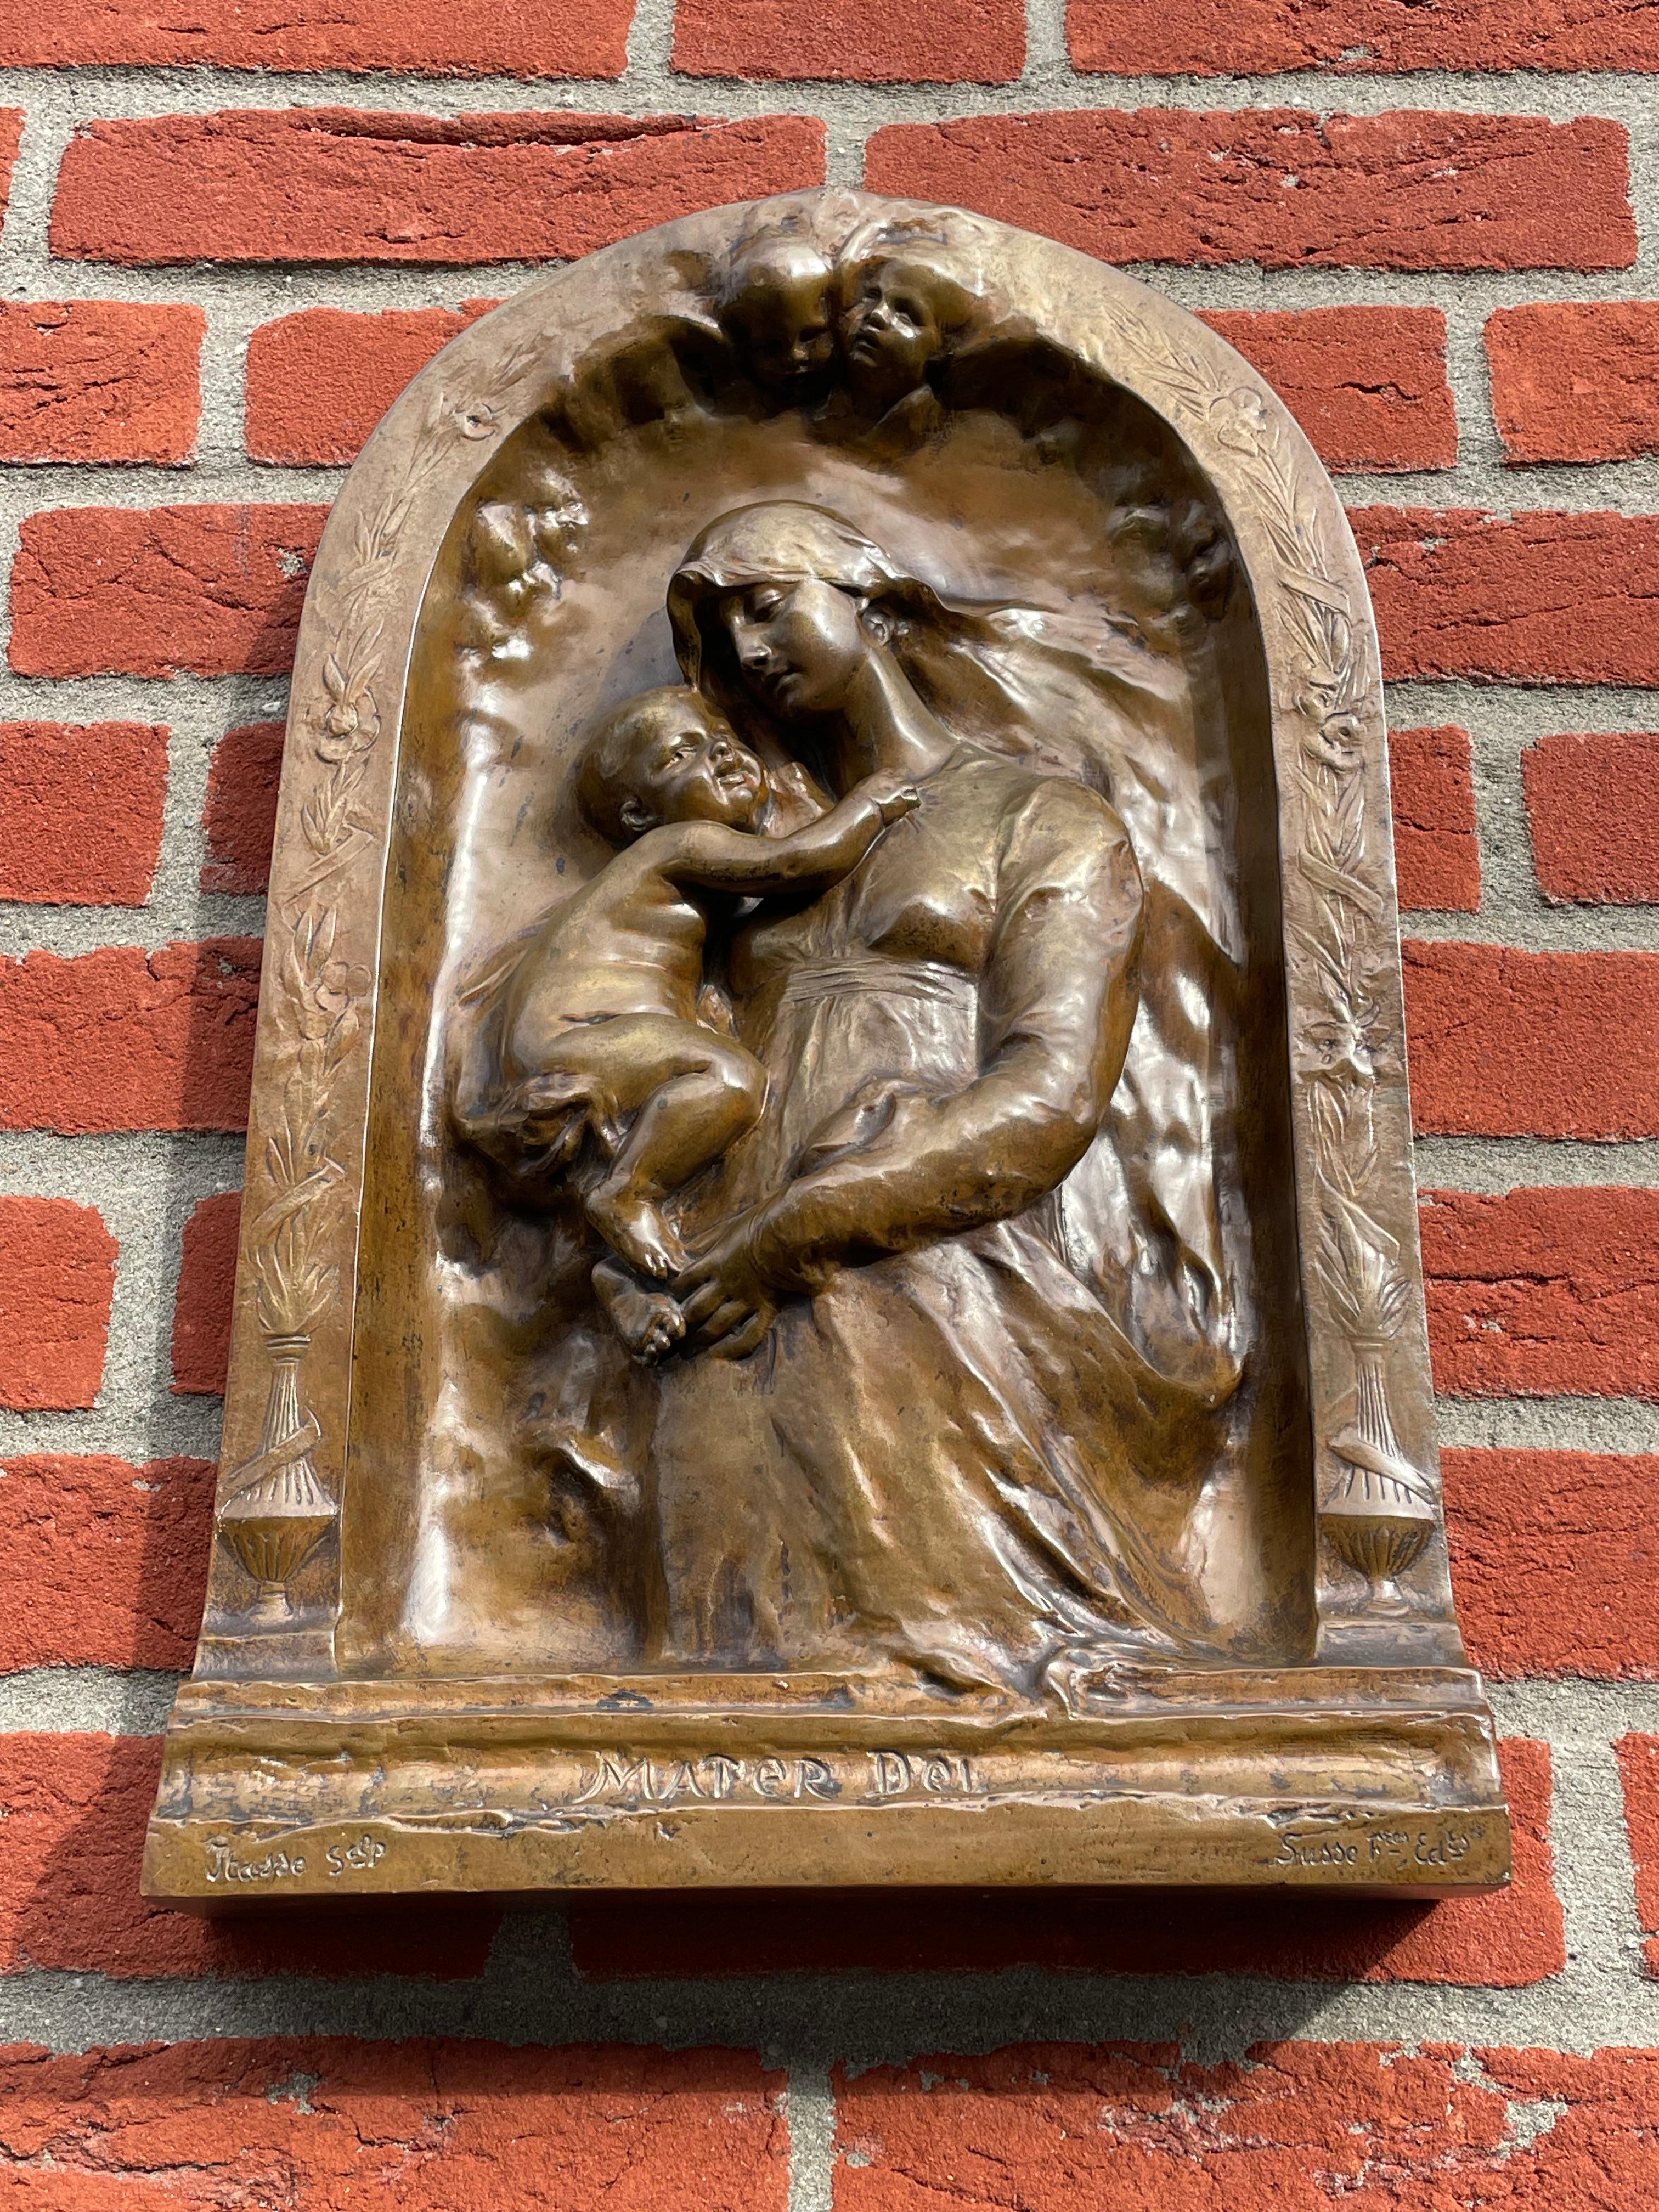 Stunning and meaningful work of art, MATER DEI.

This stunning and truly excellent condition 'Mother of God' bronze wall plaque by Adolphe Itasse (1829-1893) displays the best qualities that 19th century, European religious art has to offer. First